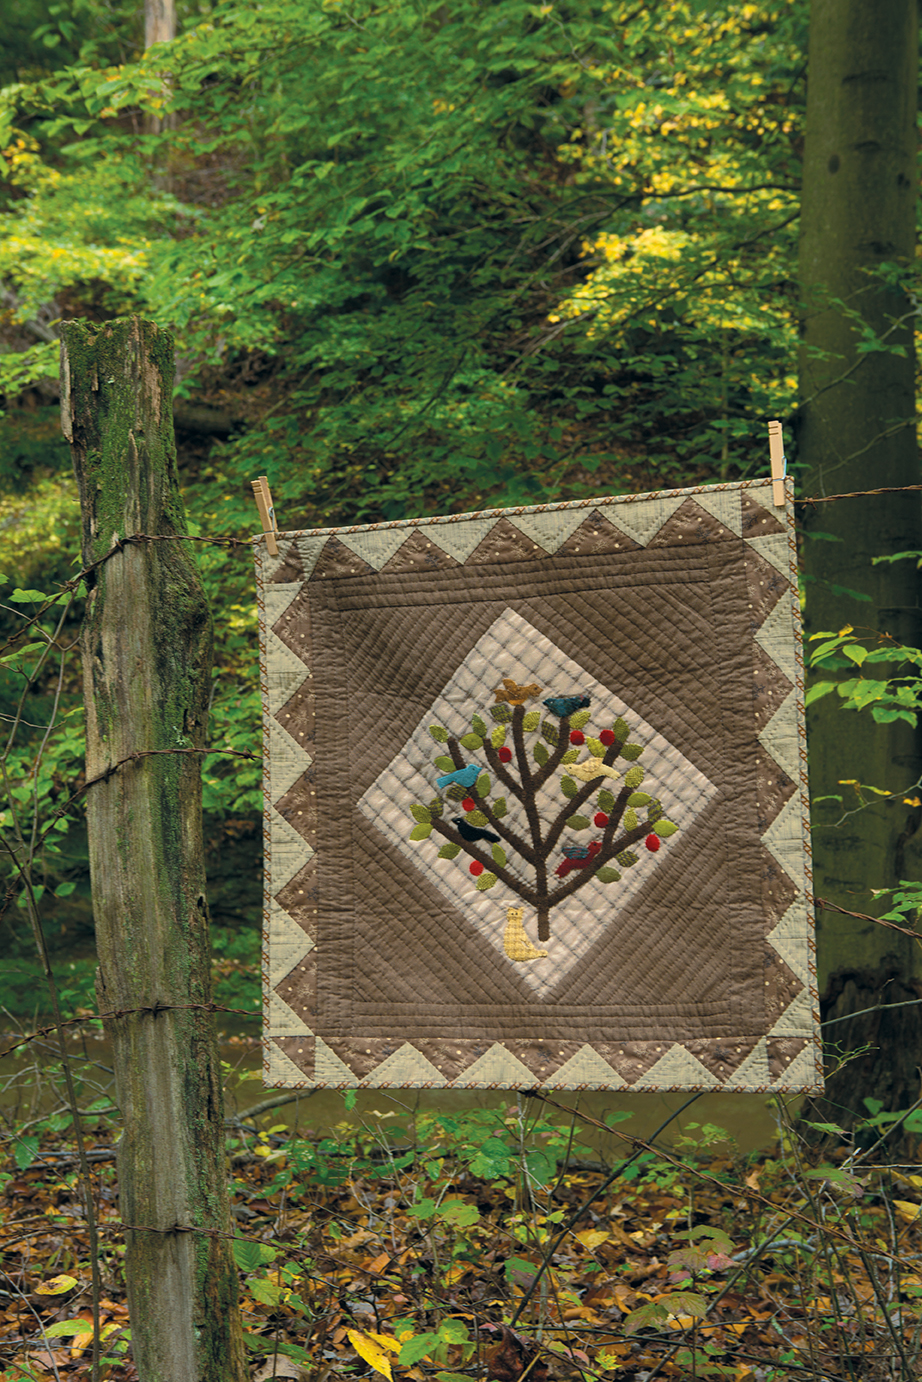 5850-quilts-sp15-11-location-nomrawhaley.jpg